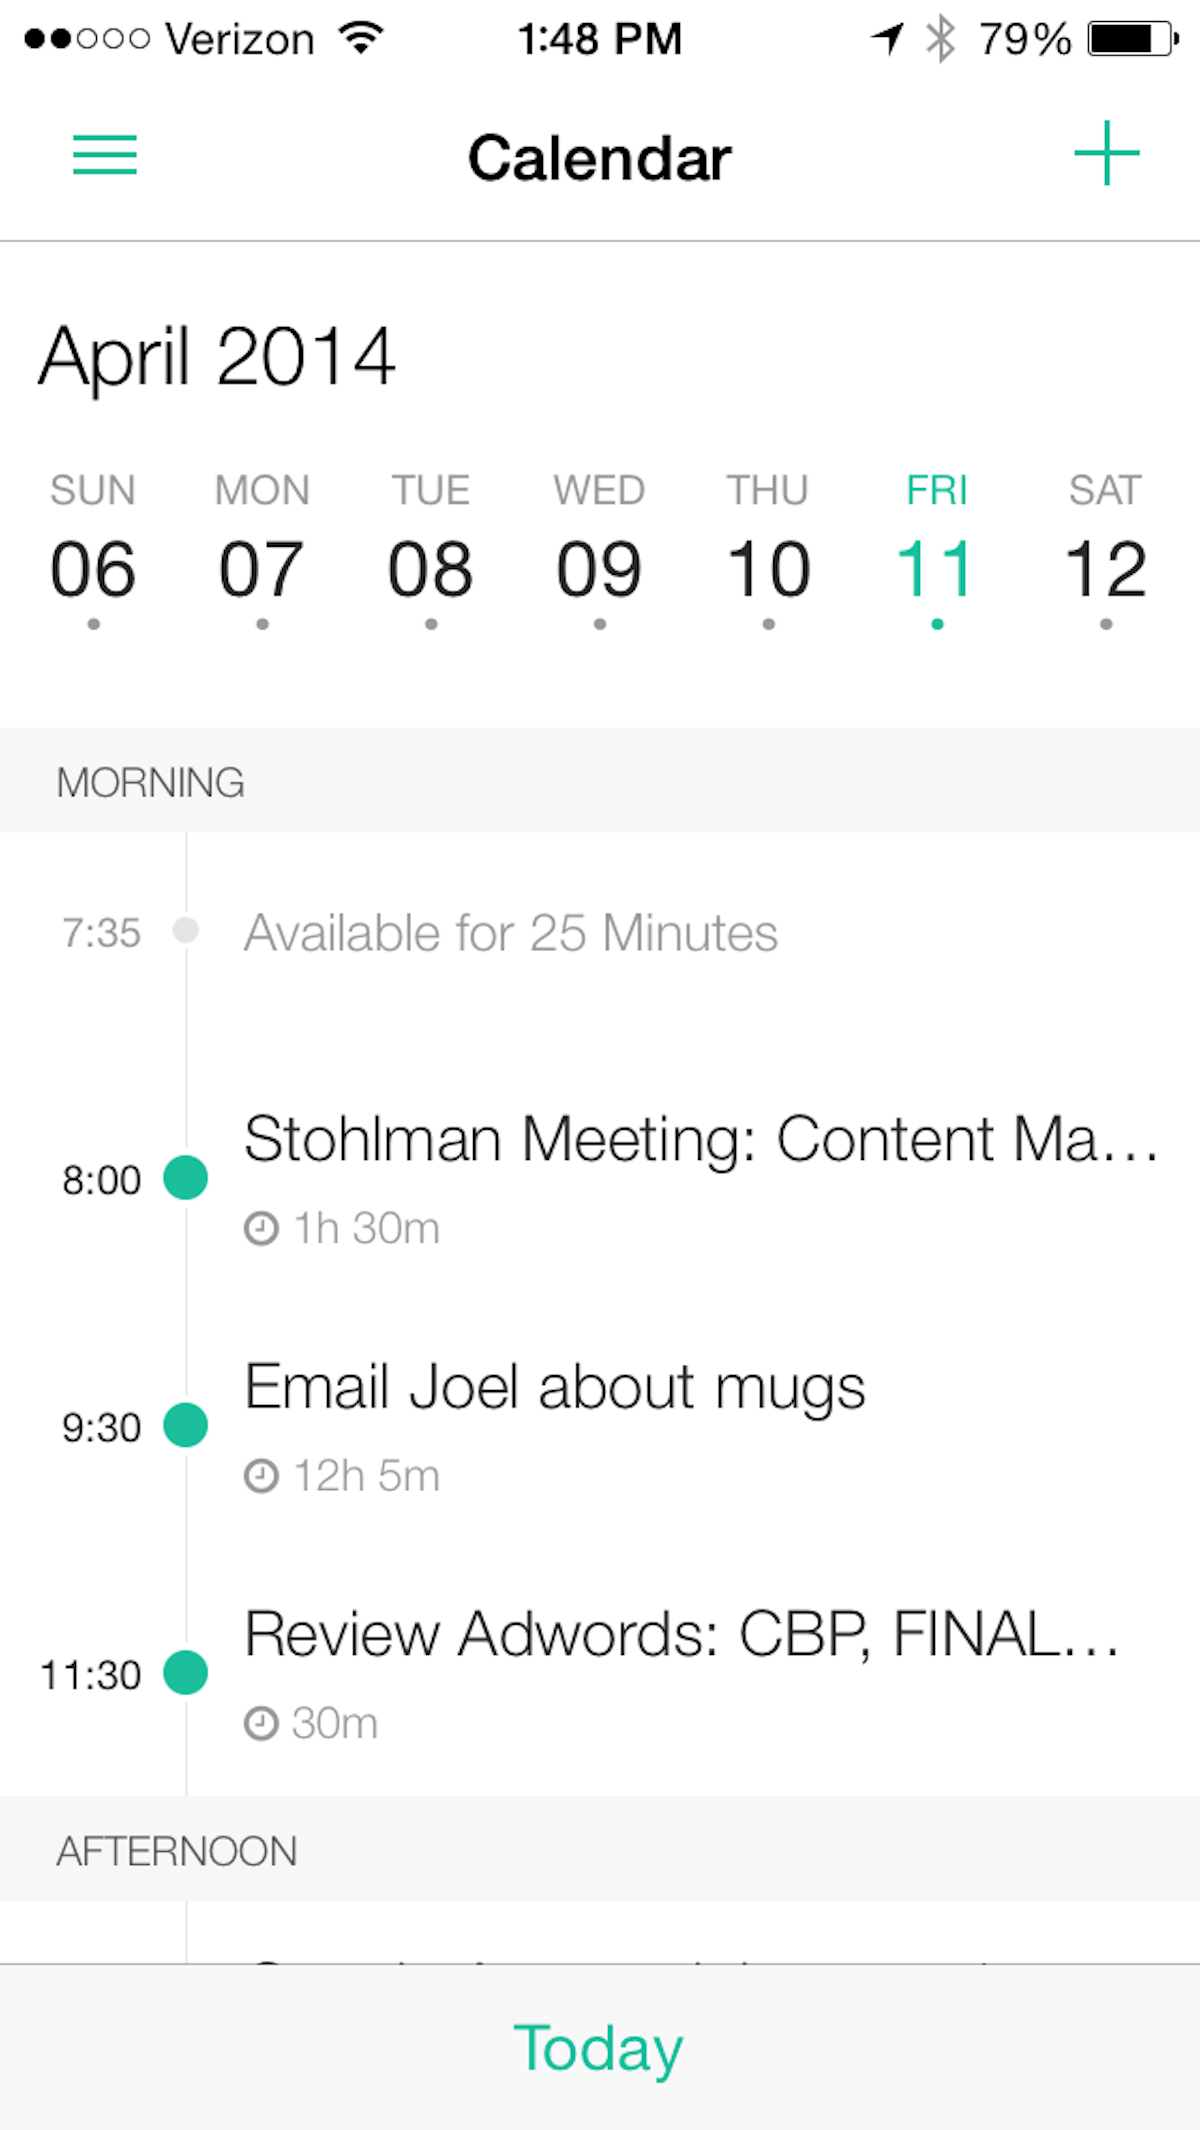  Base CRM (Now called Zendesk Sell) Adds Events & Accounts